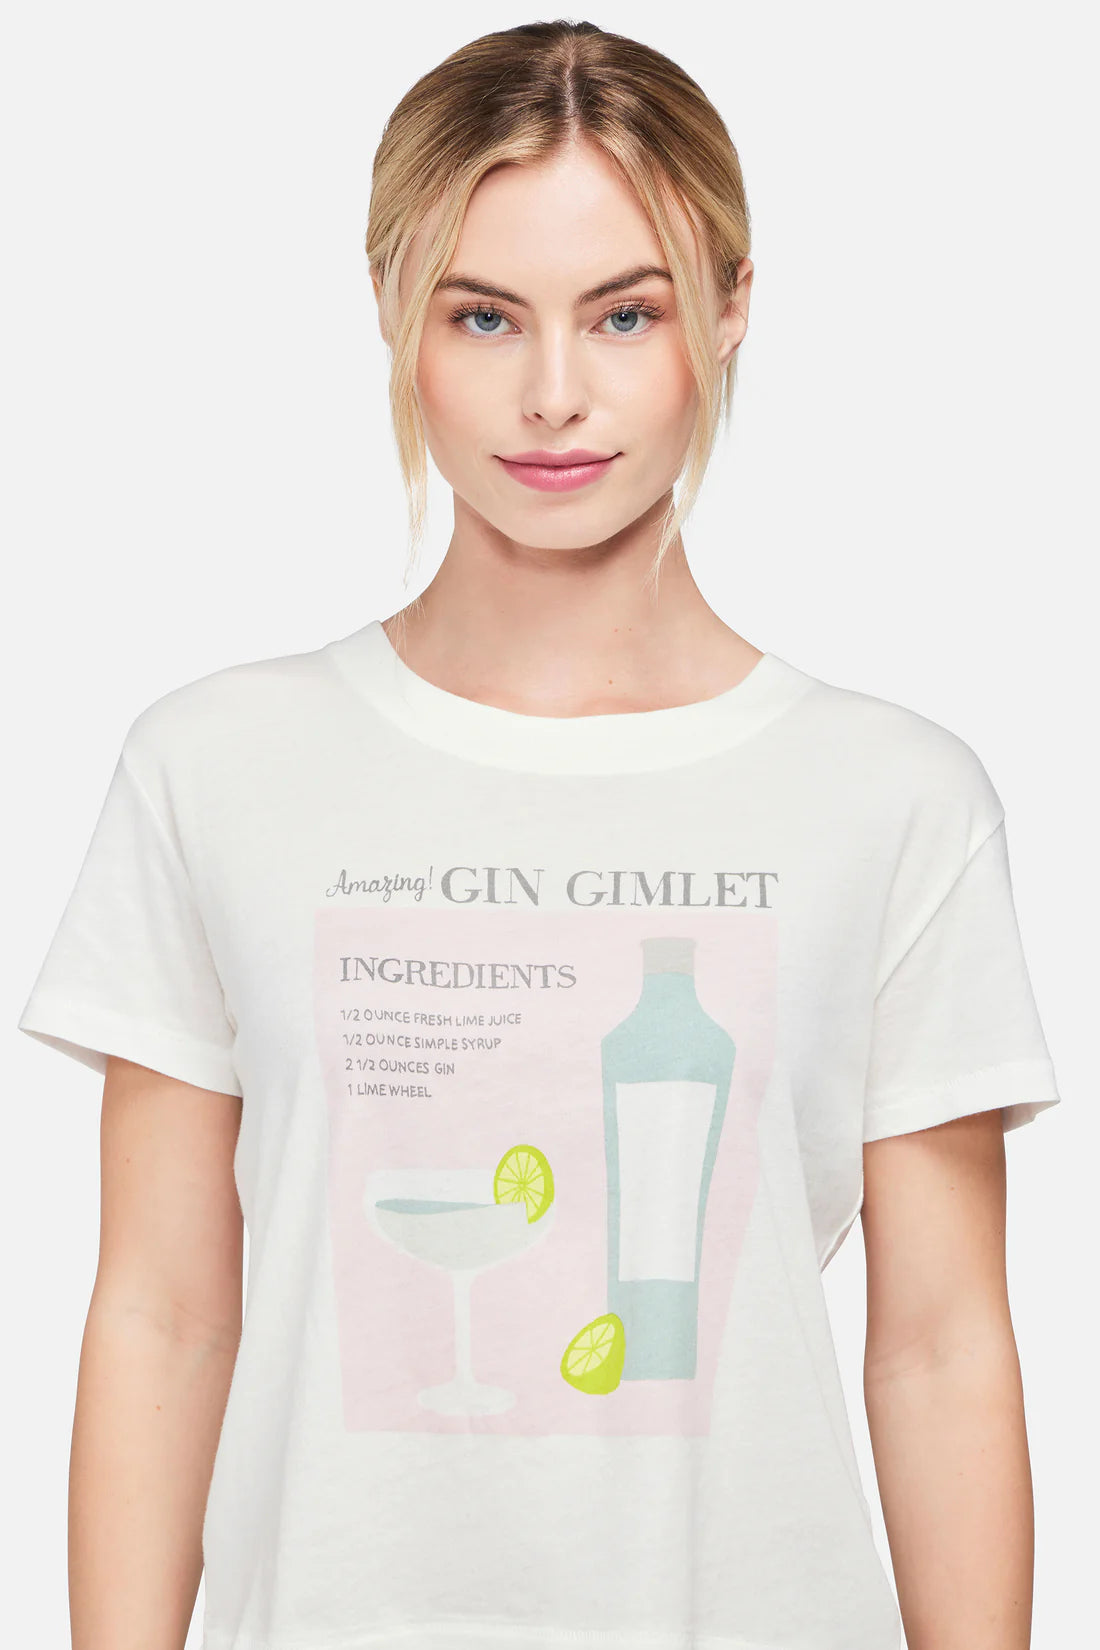 WILDFOX Gin Gimlet Charlie Top - White